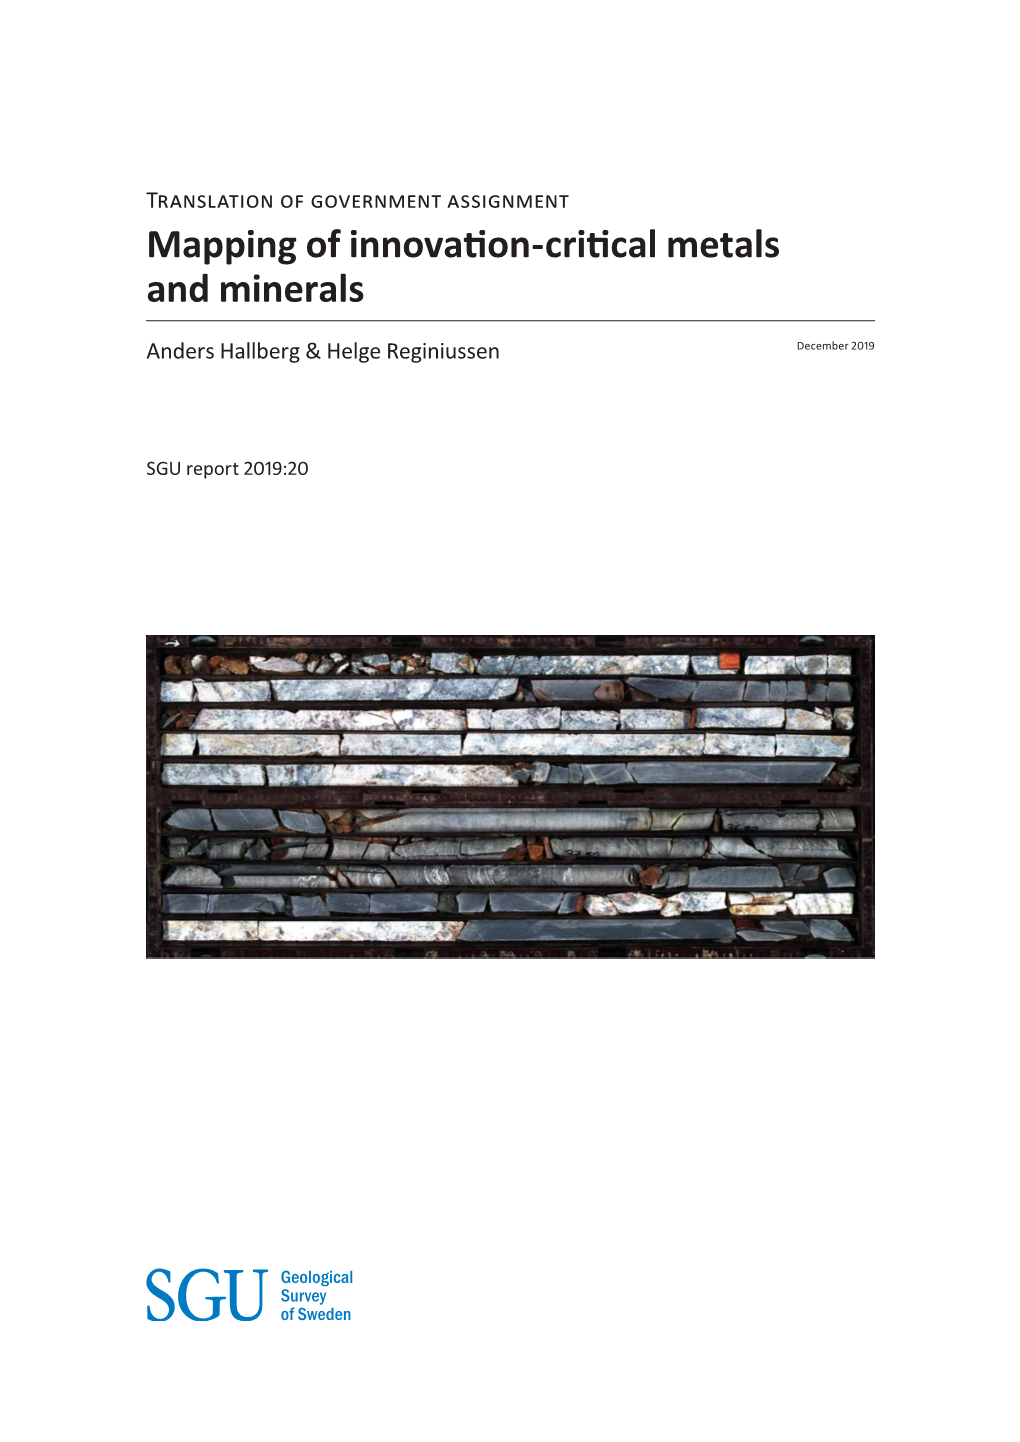 Mapping of Innovation-Critical Metals and Minerals